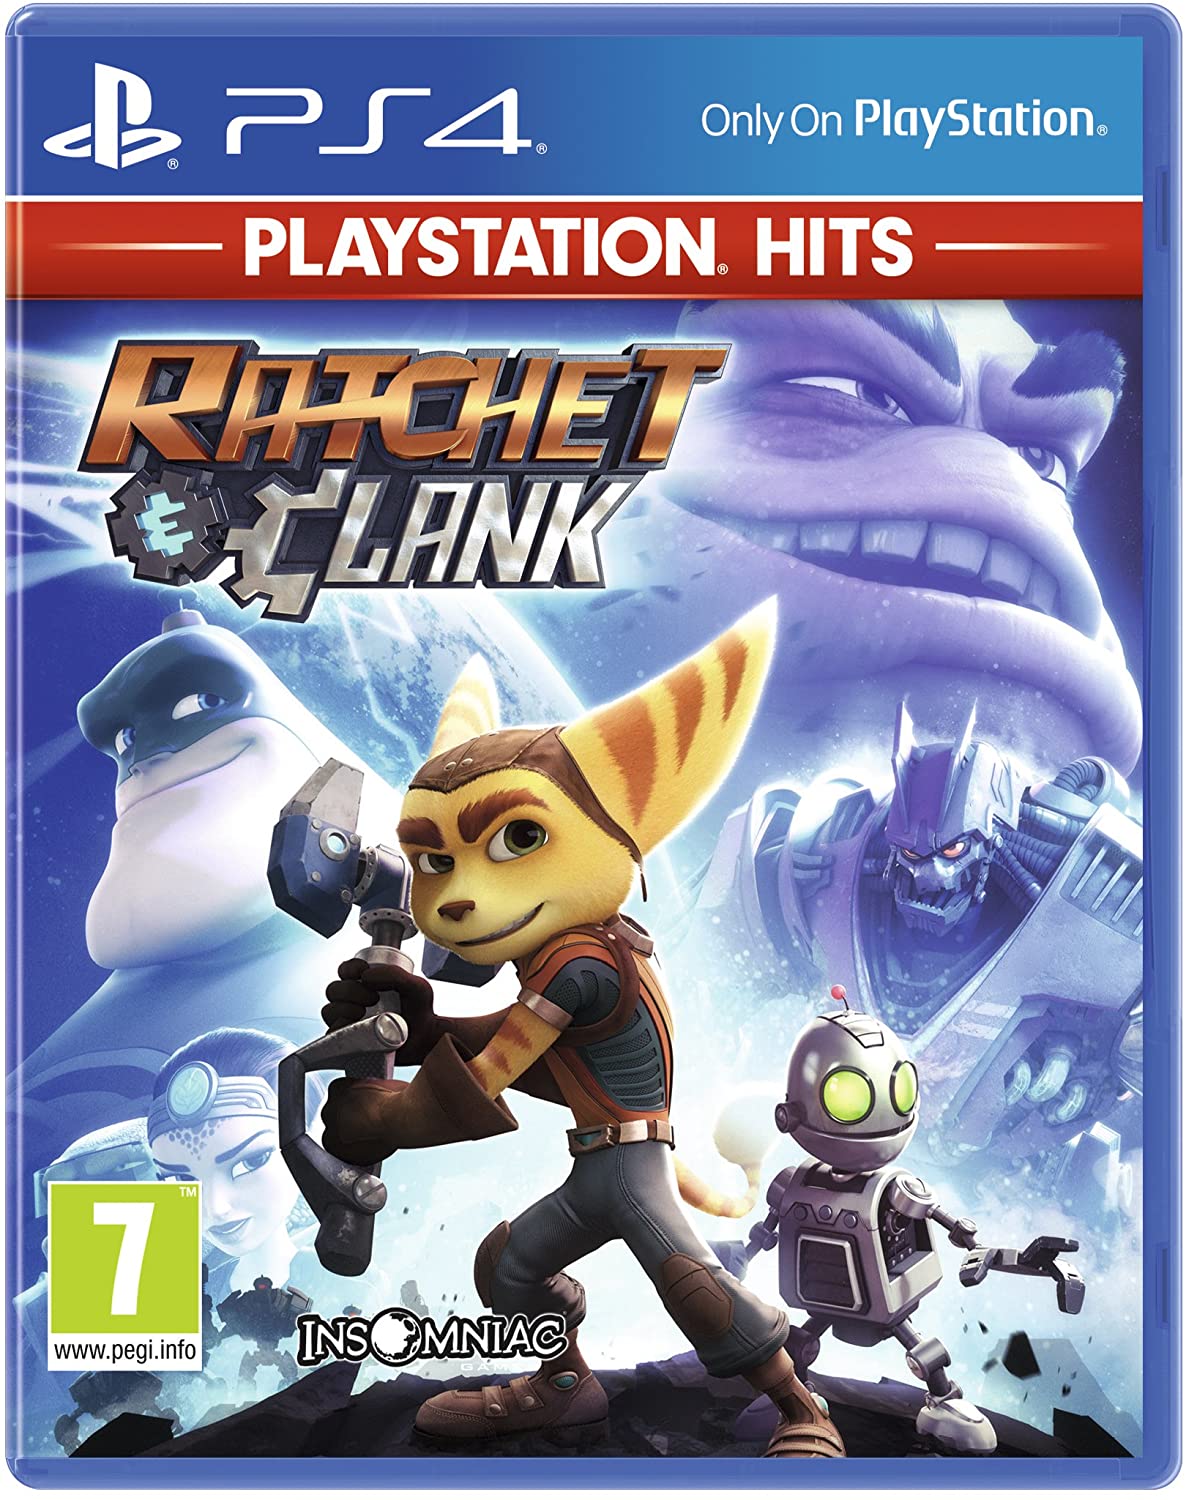 PS4 Game - Playstation Hits - Ratchet & Clank